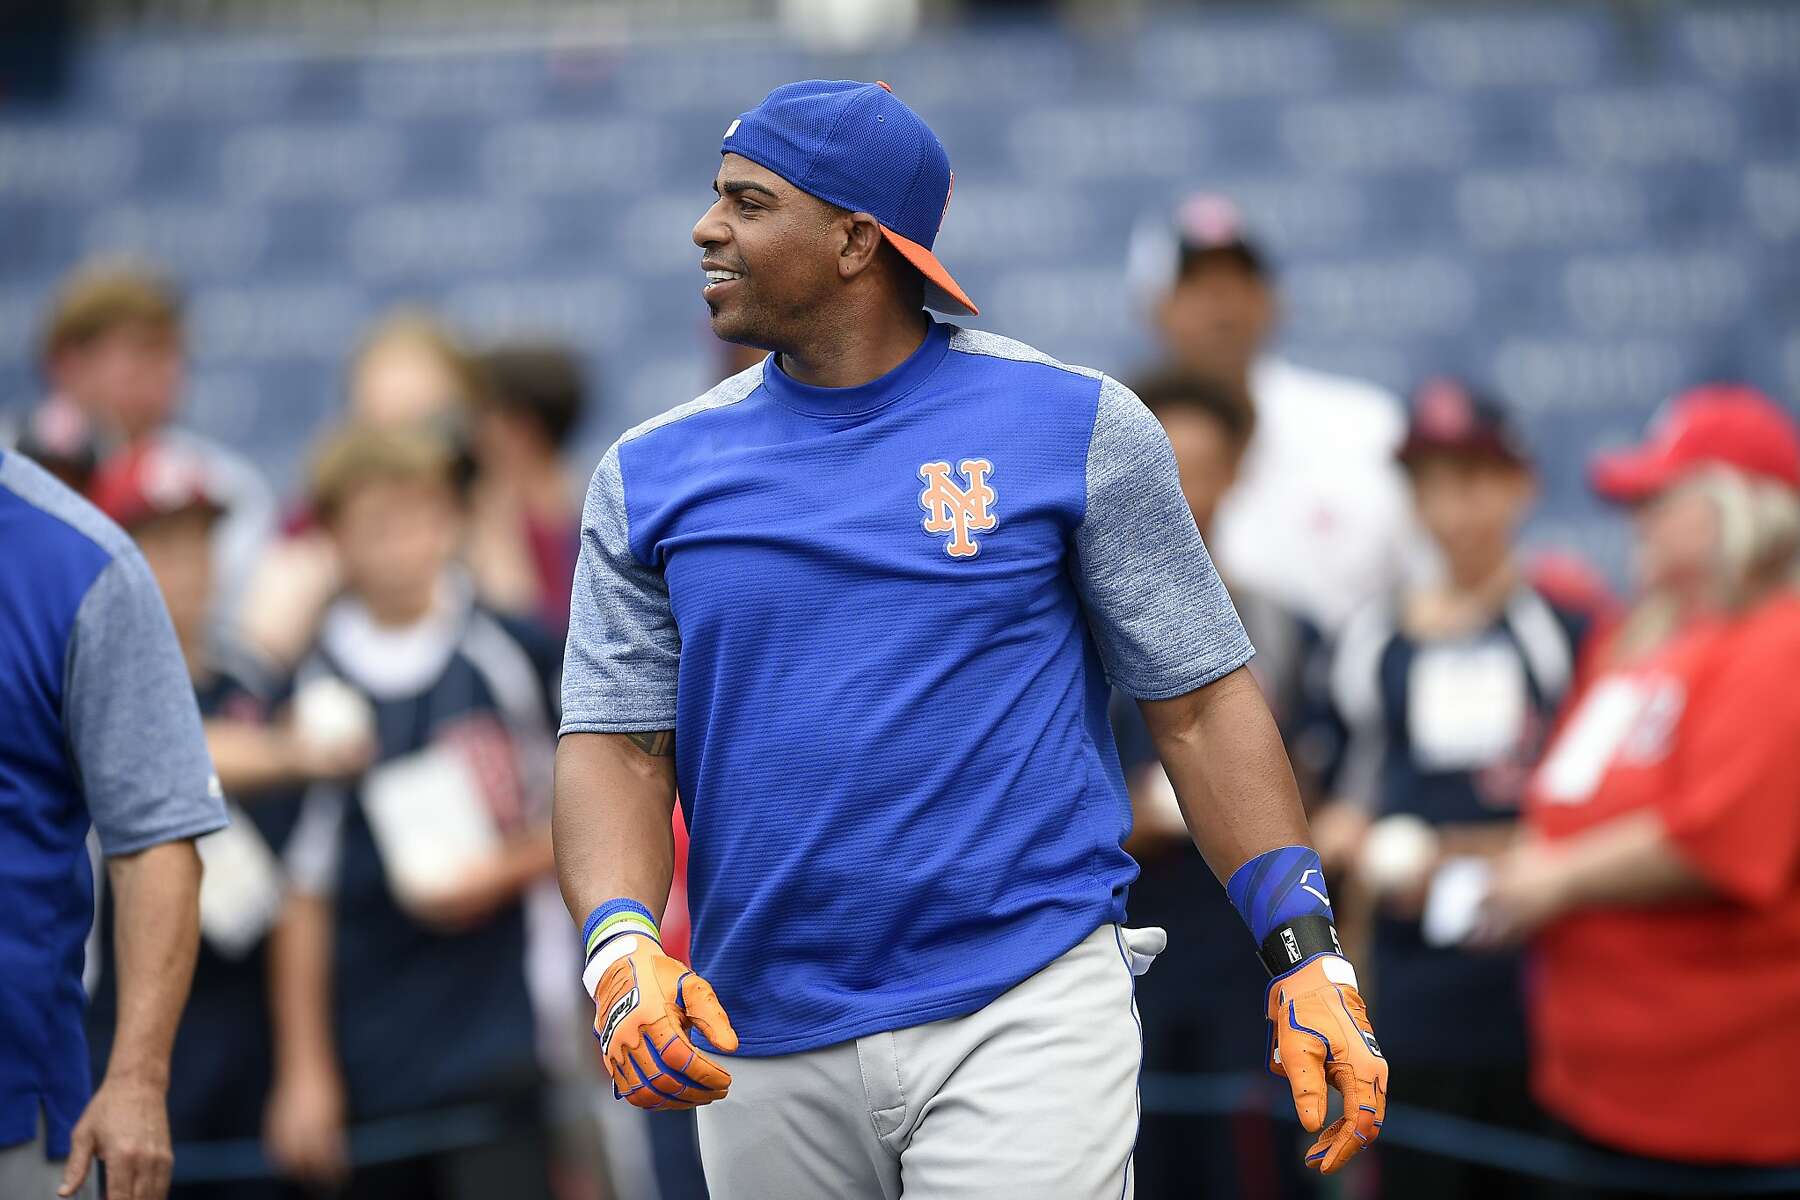 Yoenis Cespedes says he wants to end his career with Oakland A's